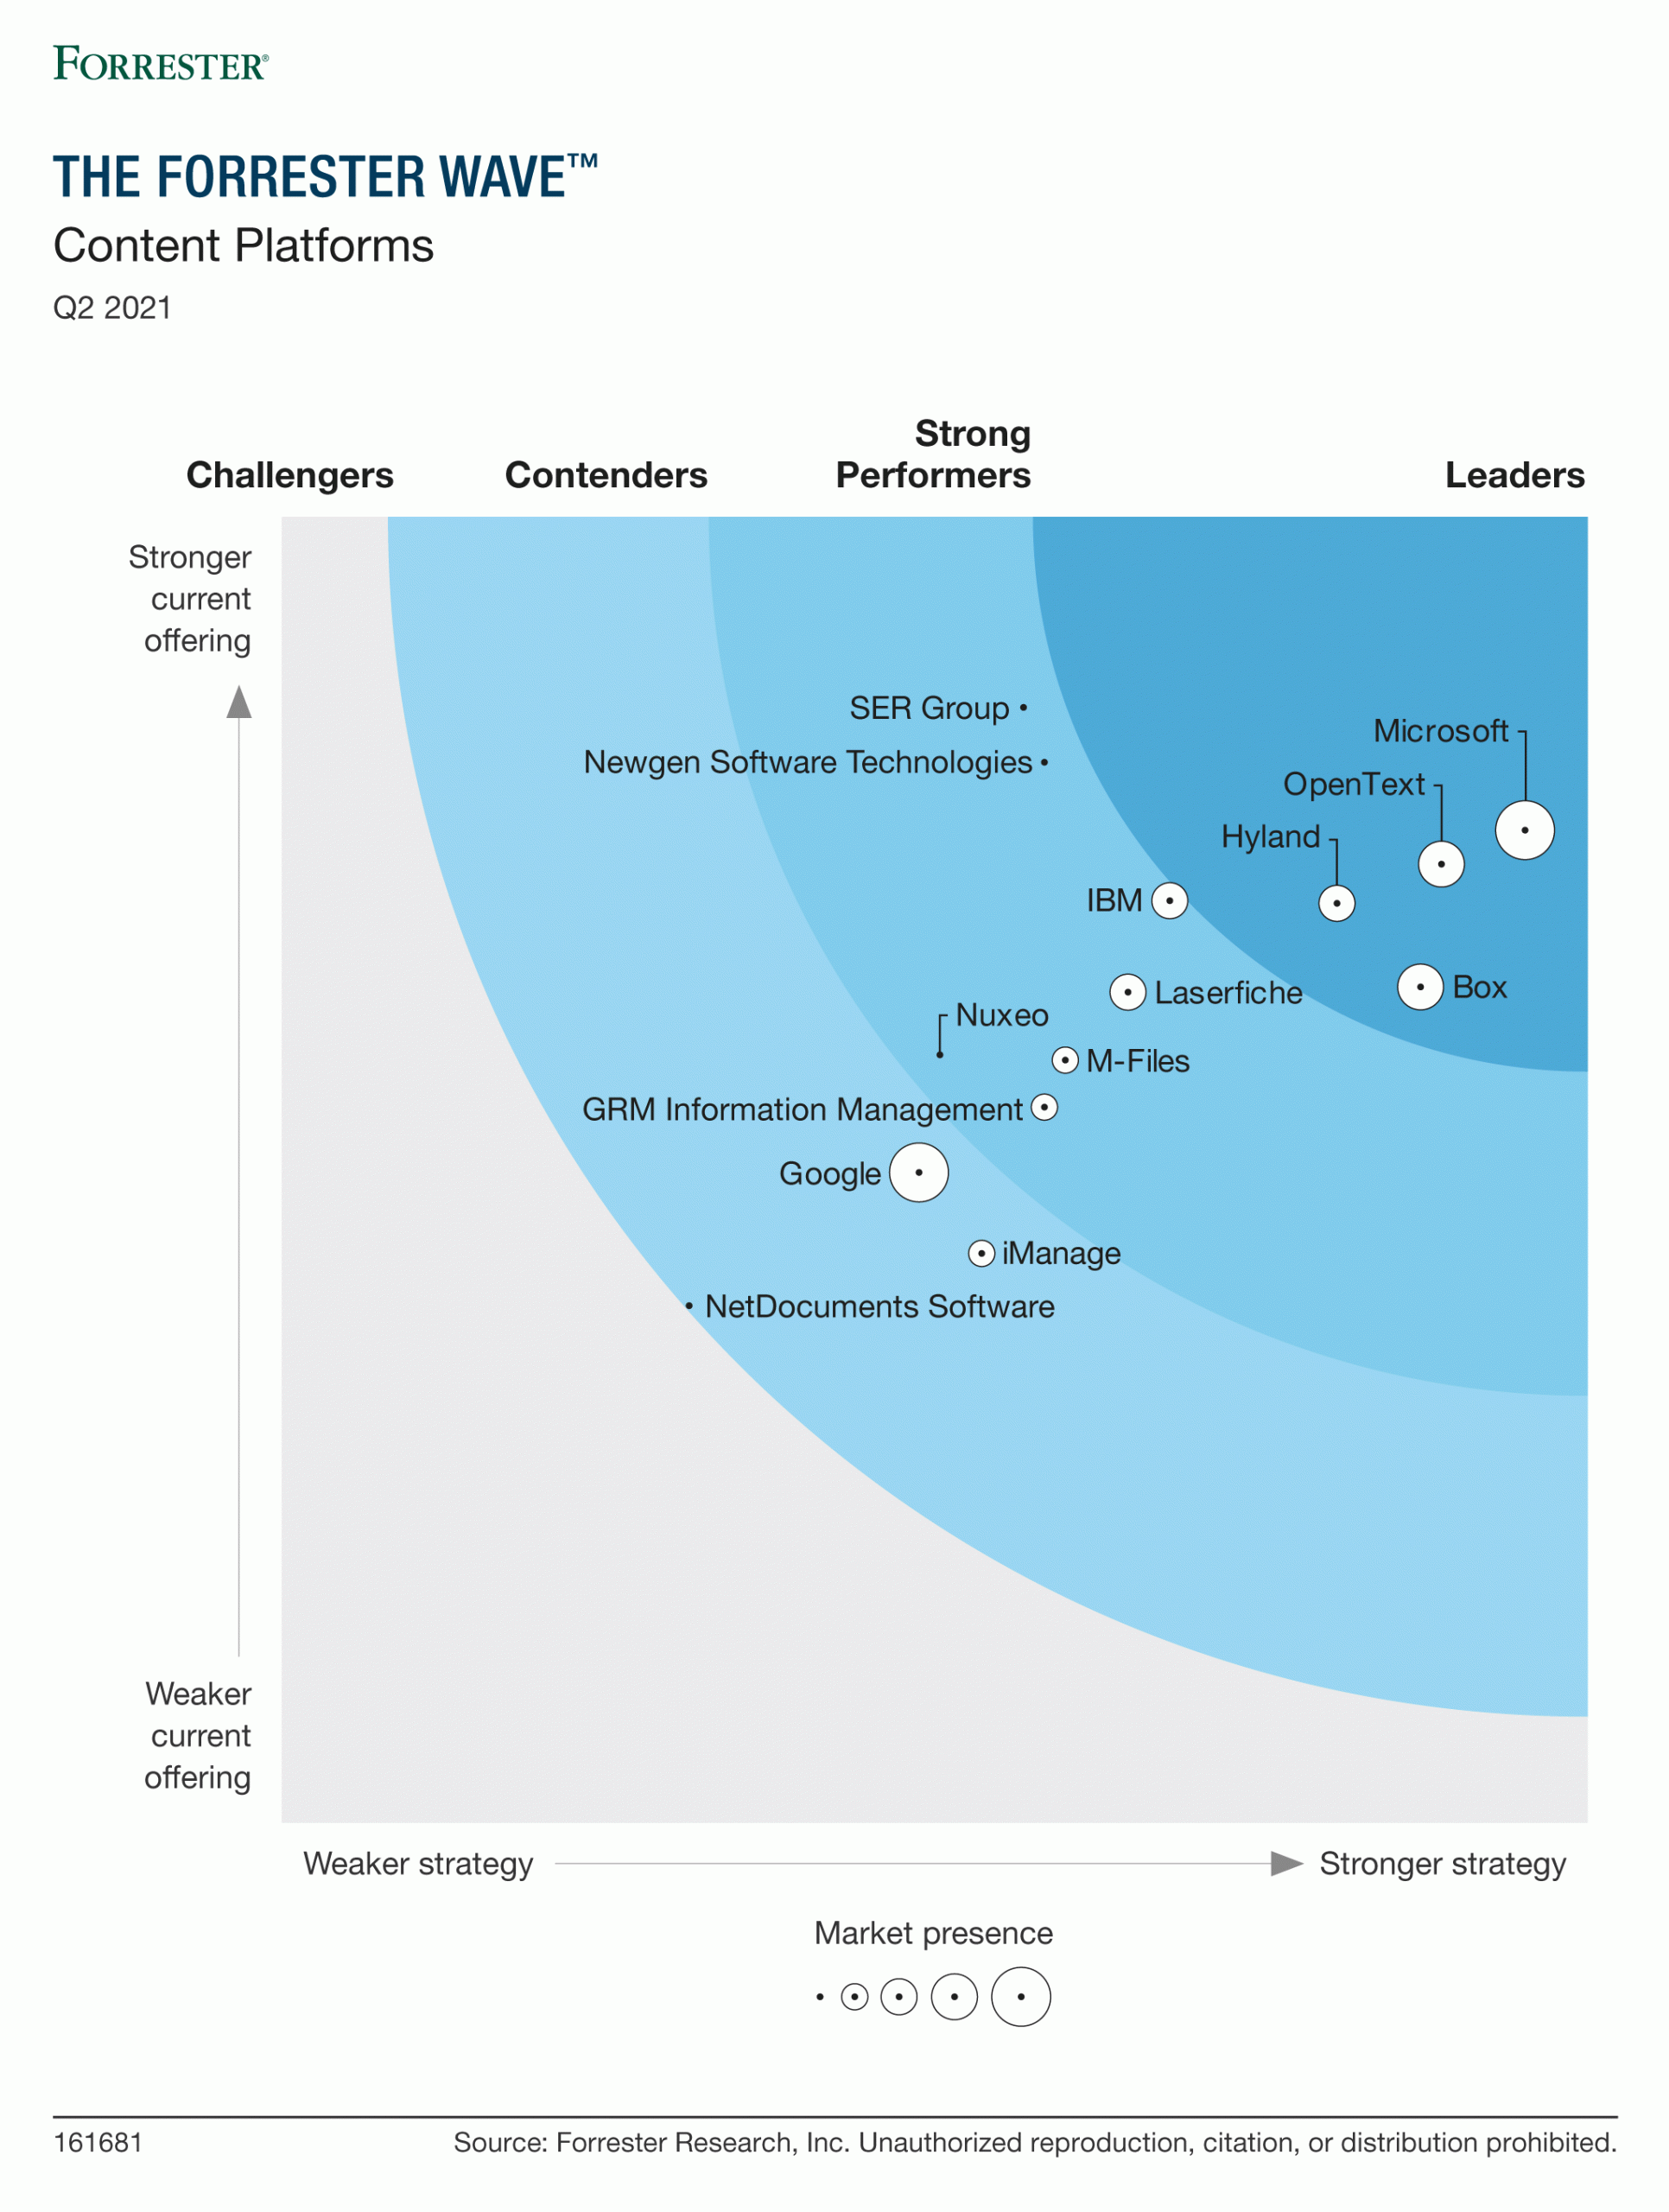 Analyst Report: The Forrester Wave™: Content Platforms, Q2 2021